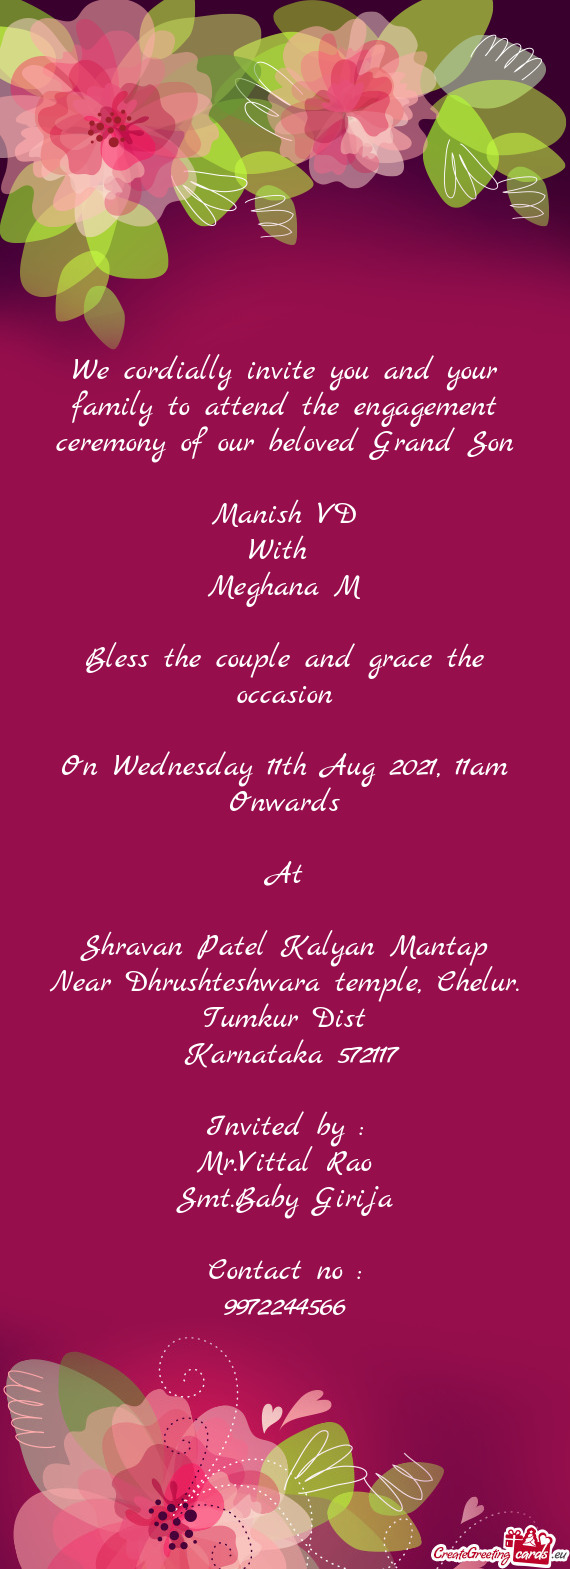 We cordially invite you and your family to attend the engagement ceremony of our beloved Grand Son